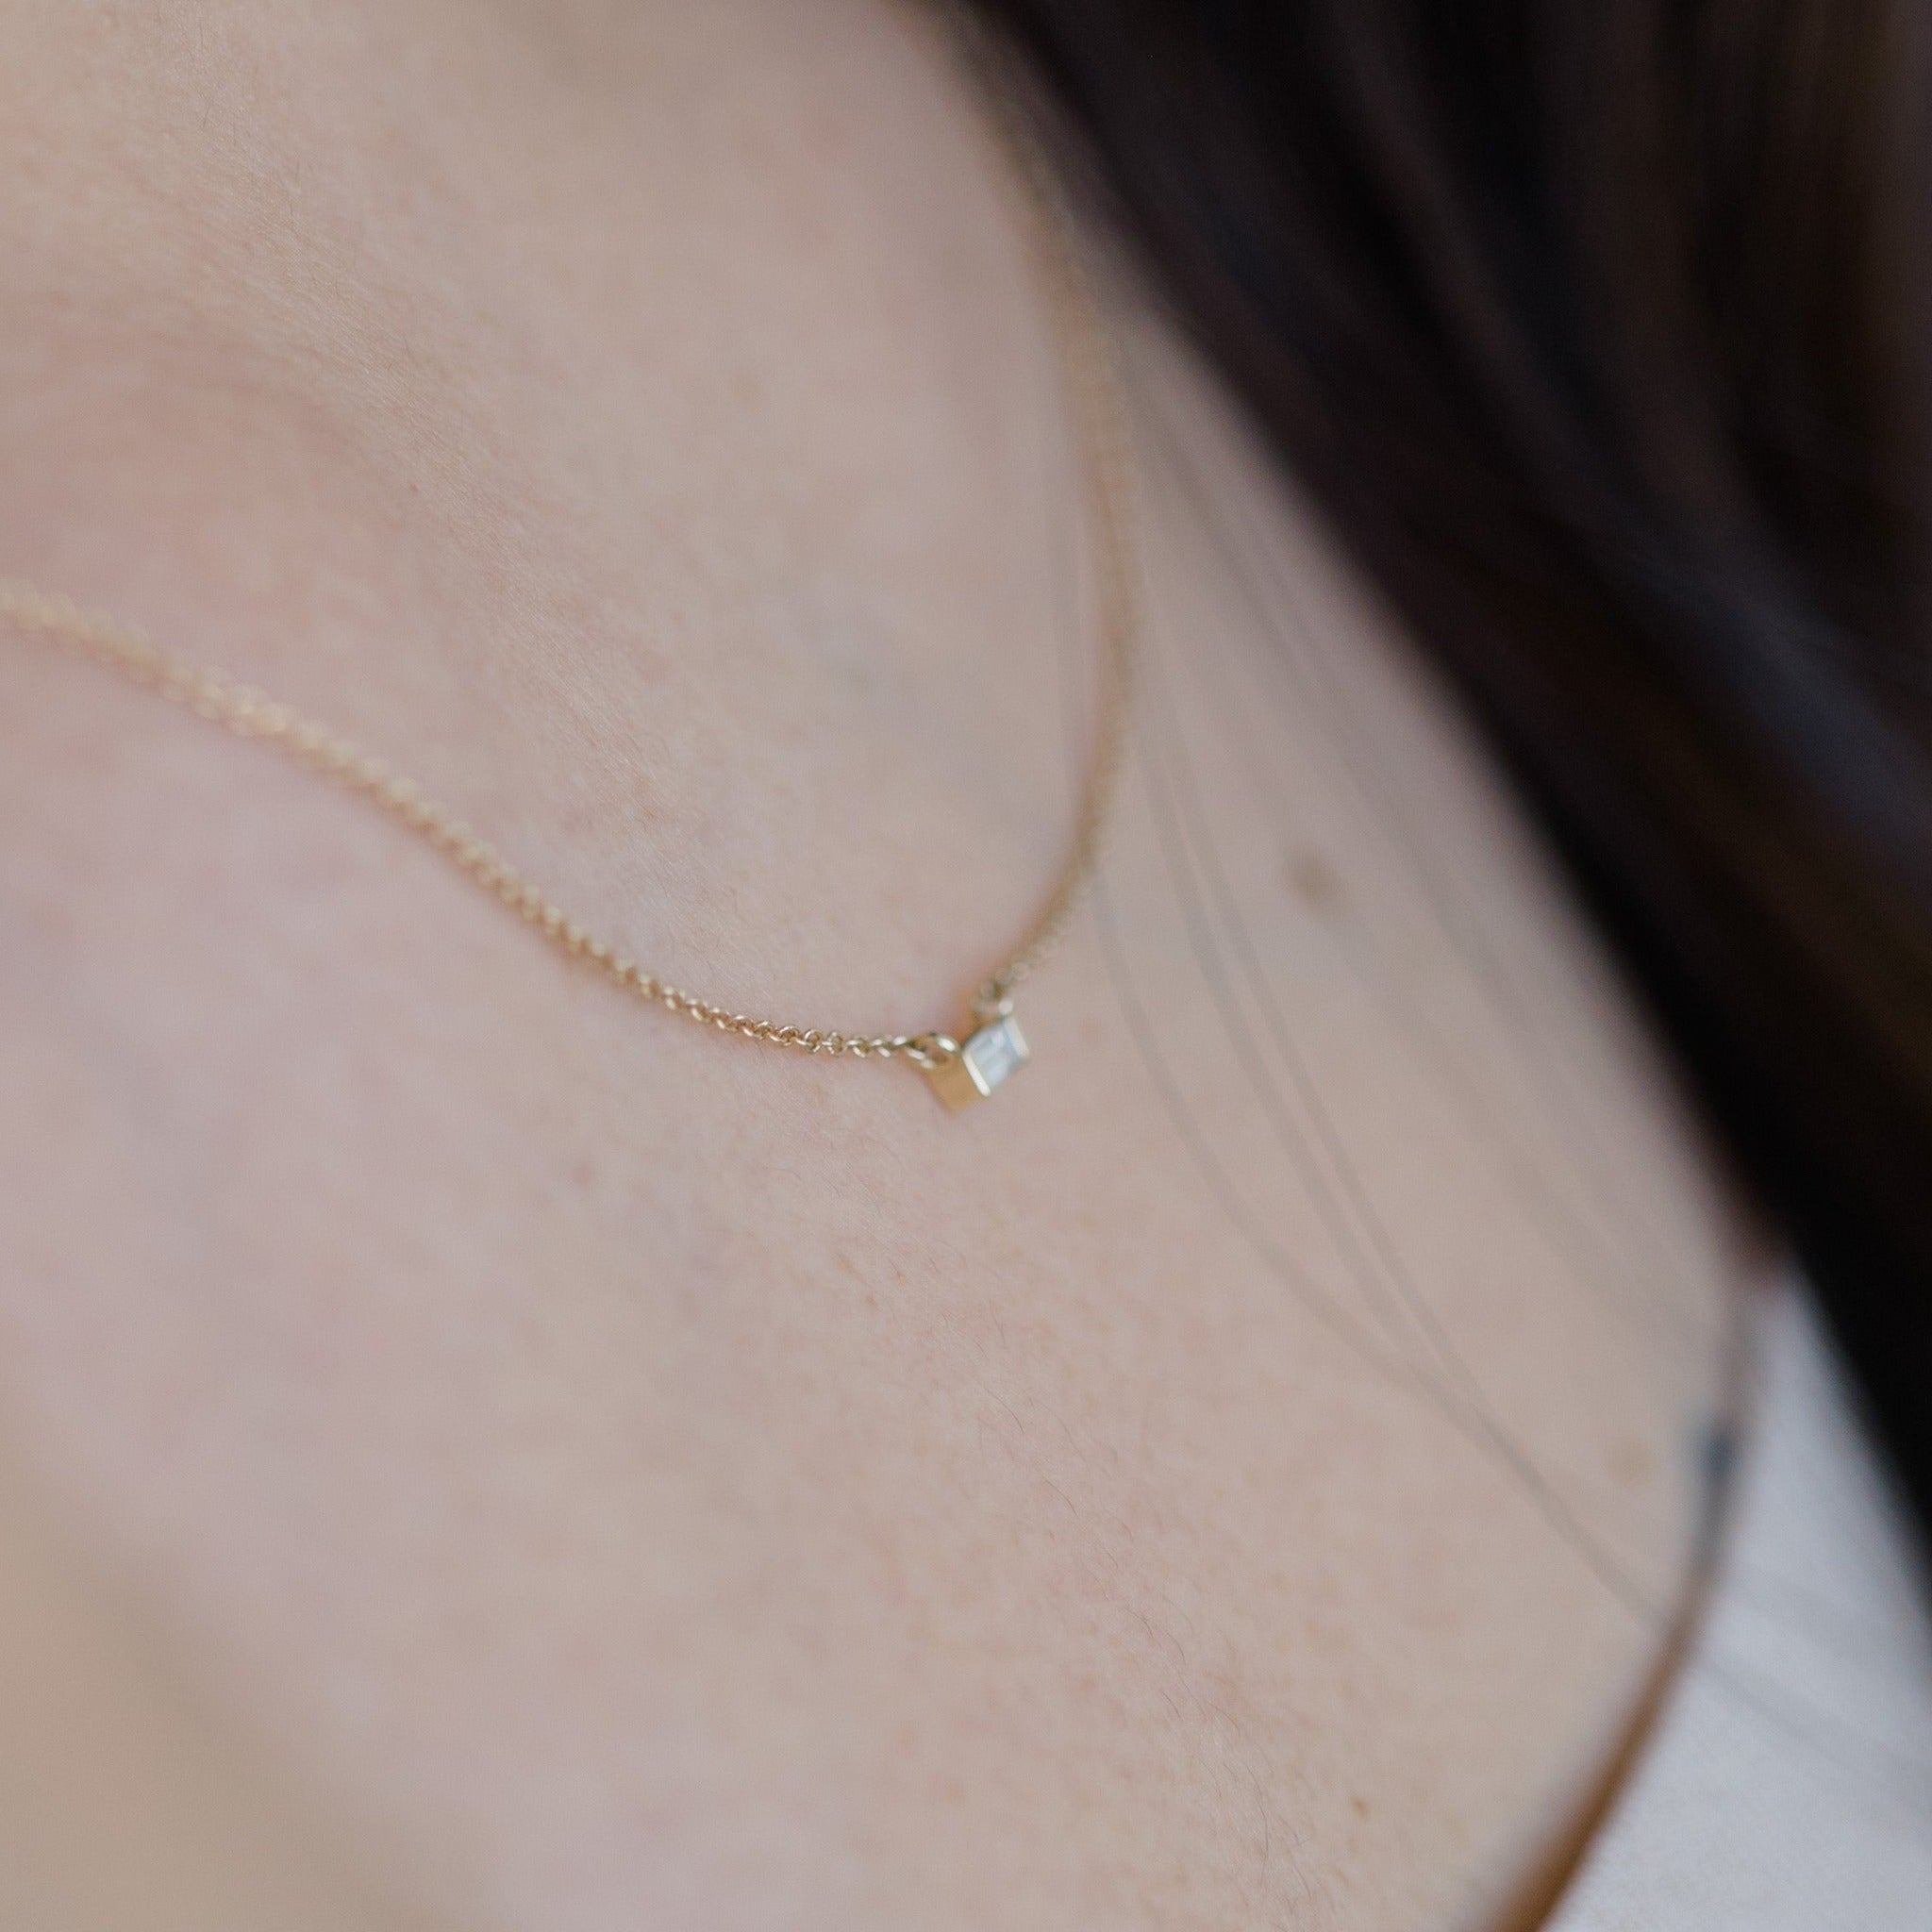 Dainty necklace is 14k yellow gold with a stunning rectangular diamond pendant.